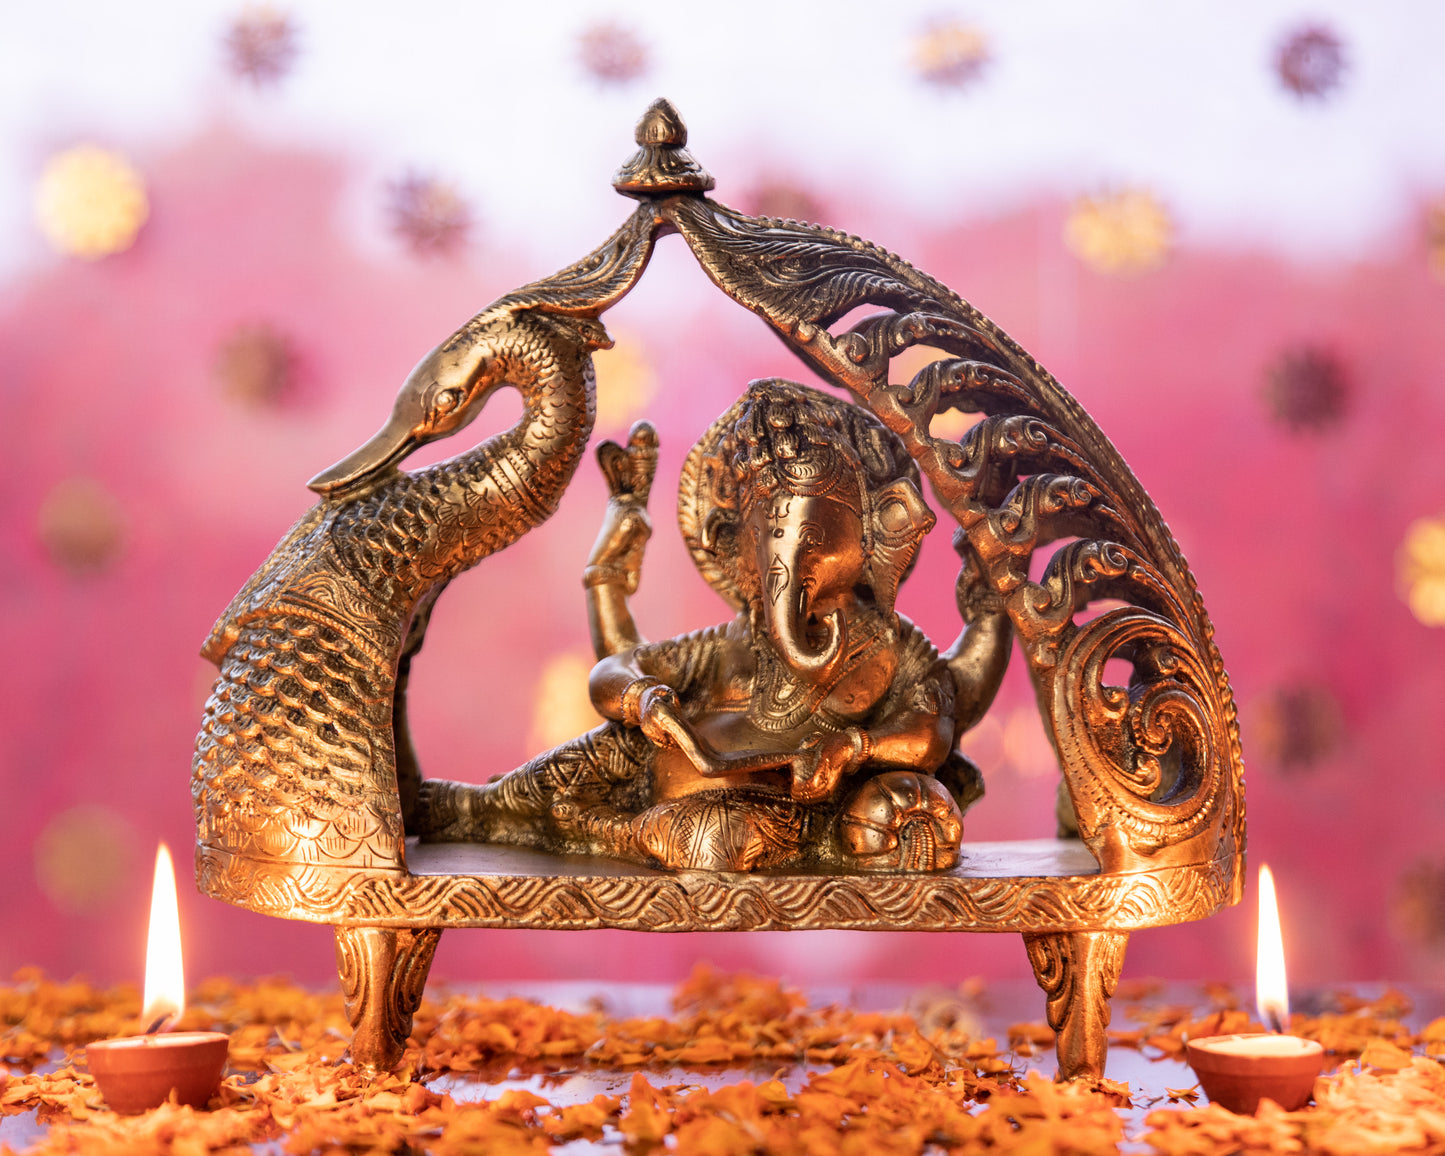 This intricately crafted pure brass idol radiates the majestic presence of Lord Ganesha